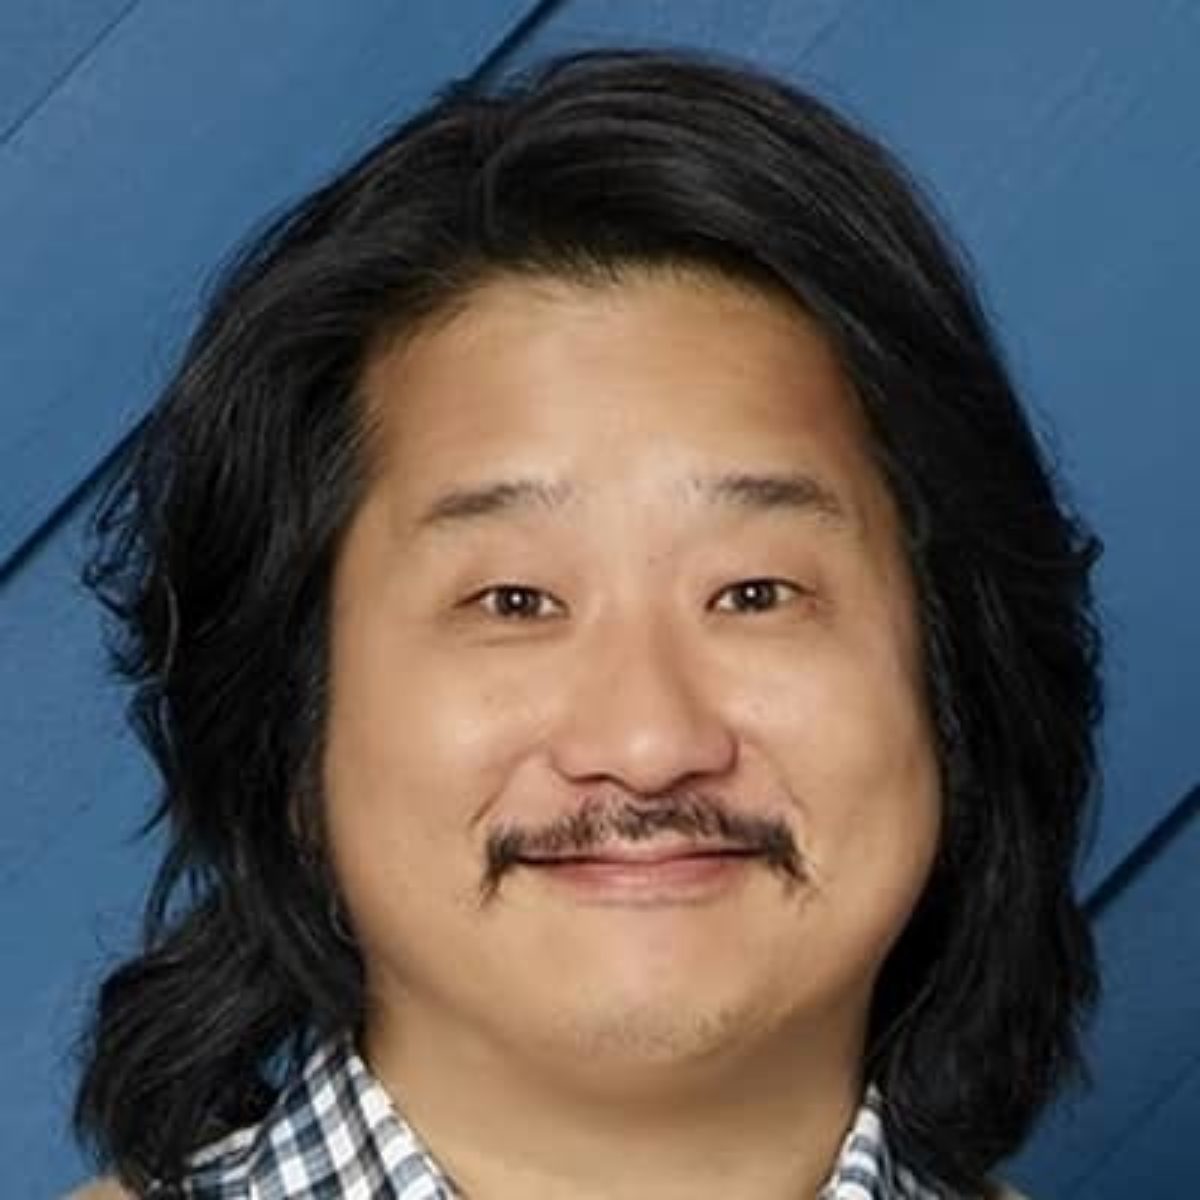 Bobby Lee - Bio, Age, Career, Net Worth, Nationality, Facts, Height